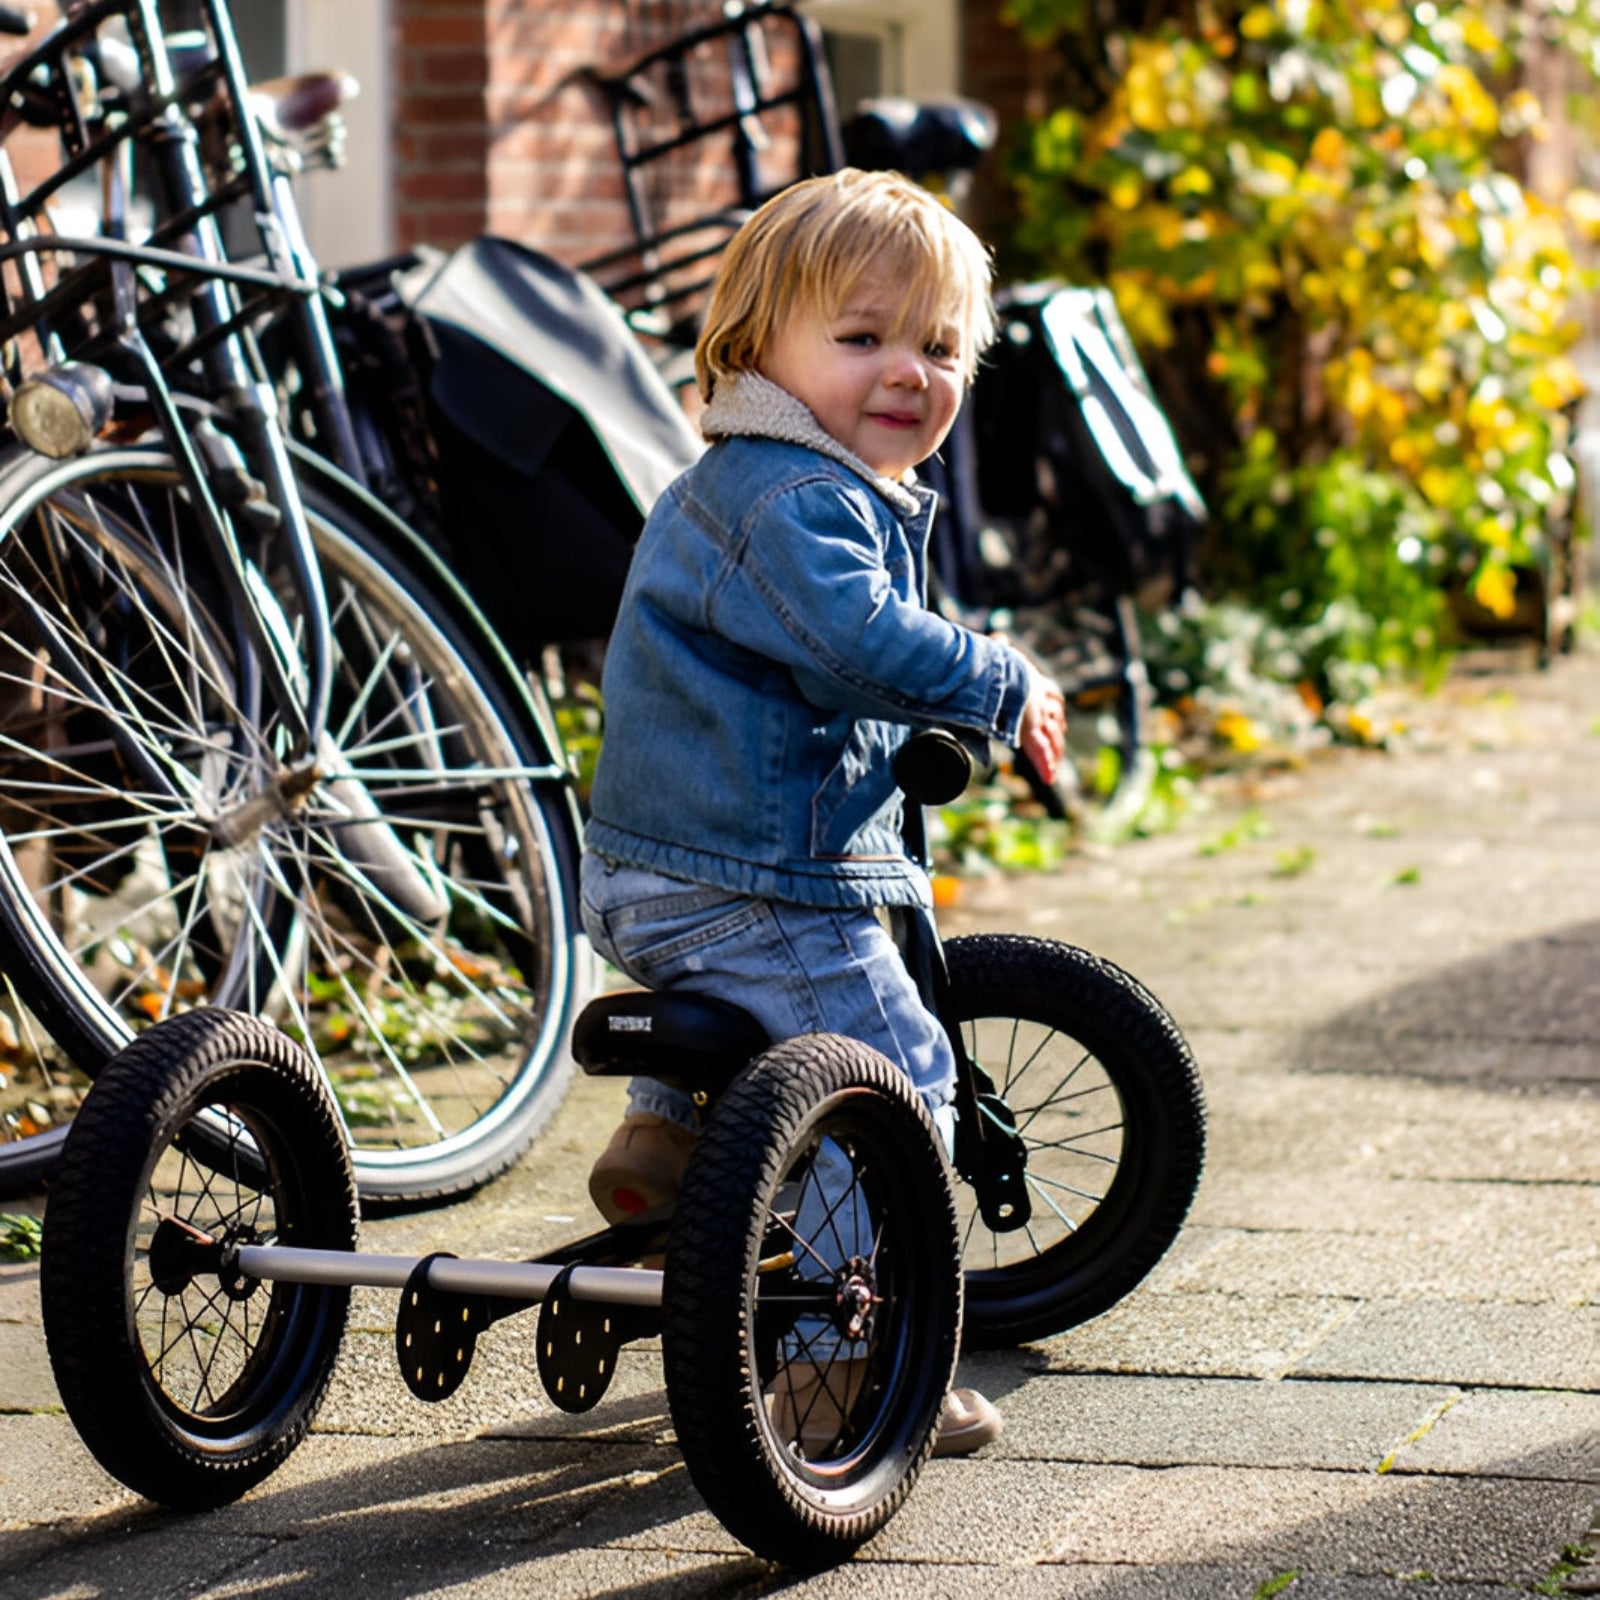 Child enjoying a sunny day out with the Trybike Black.